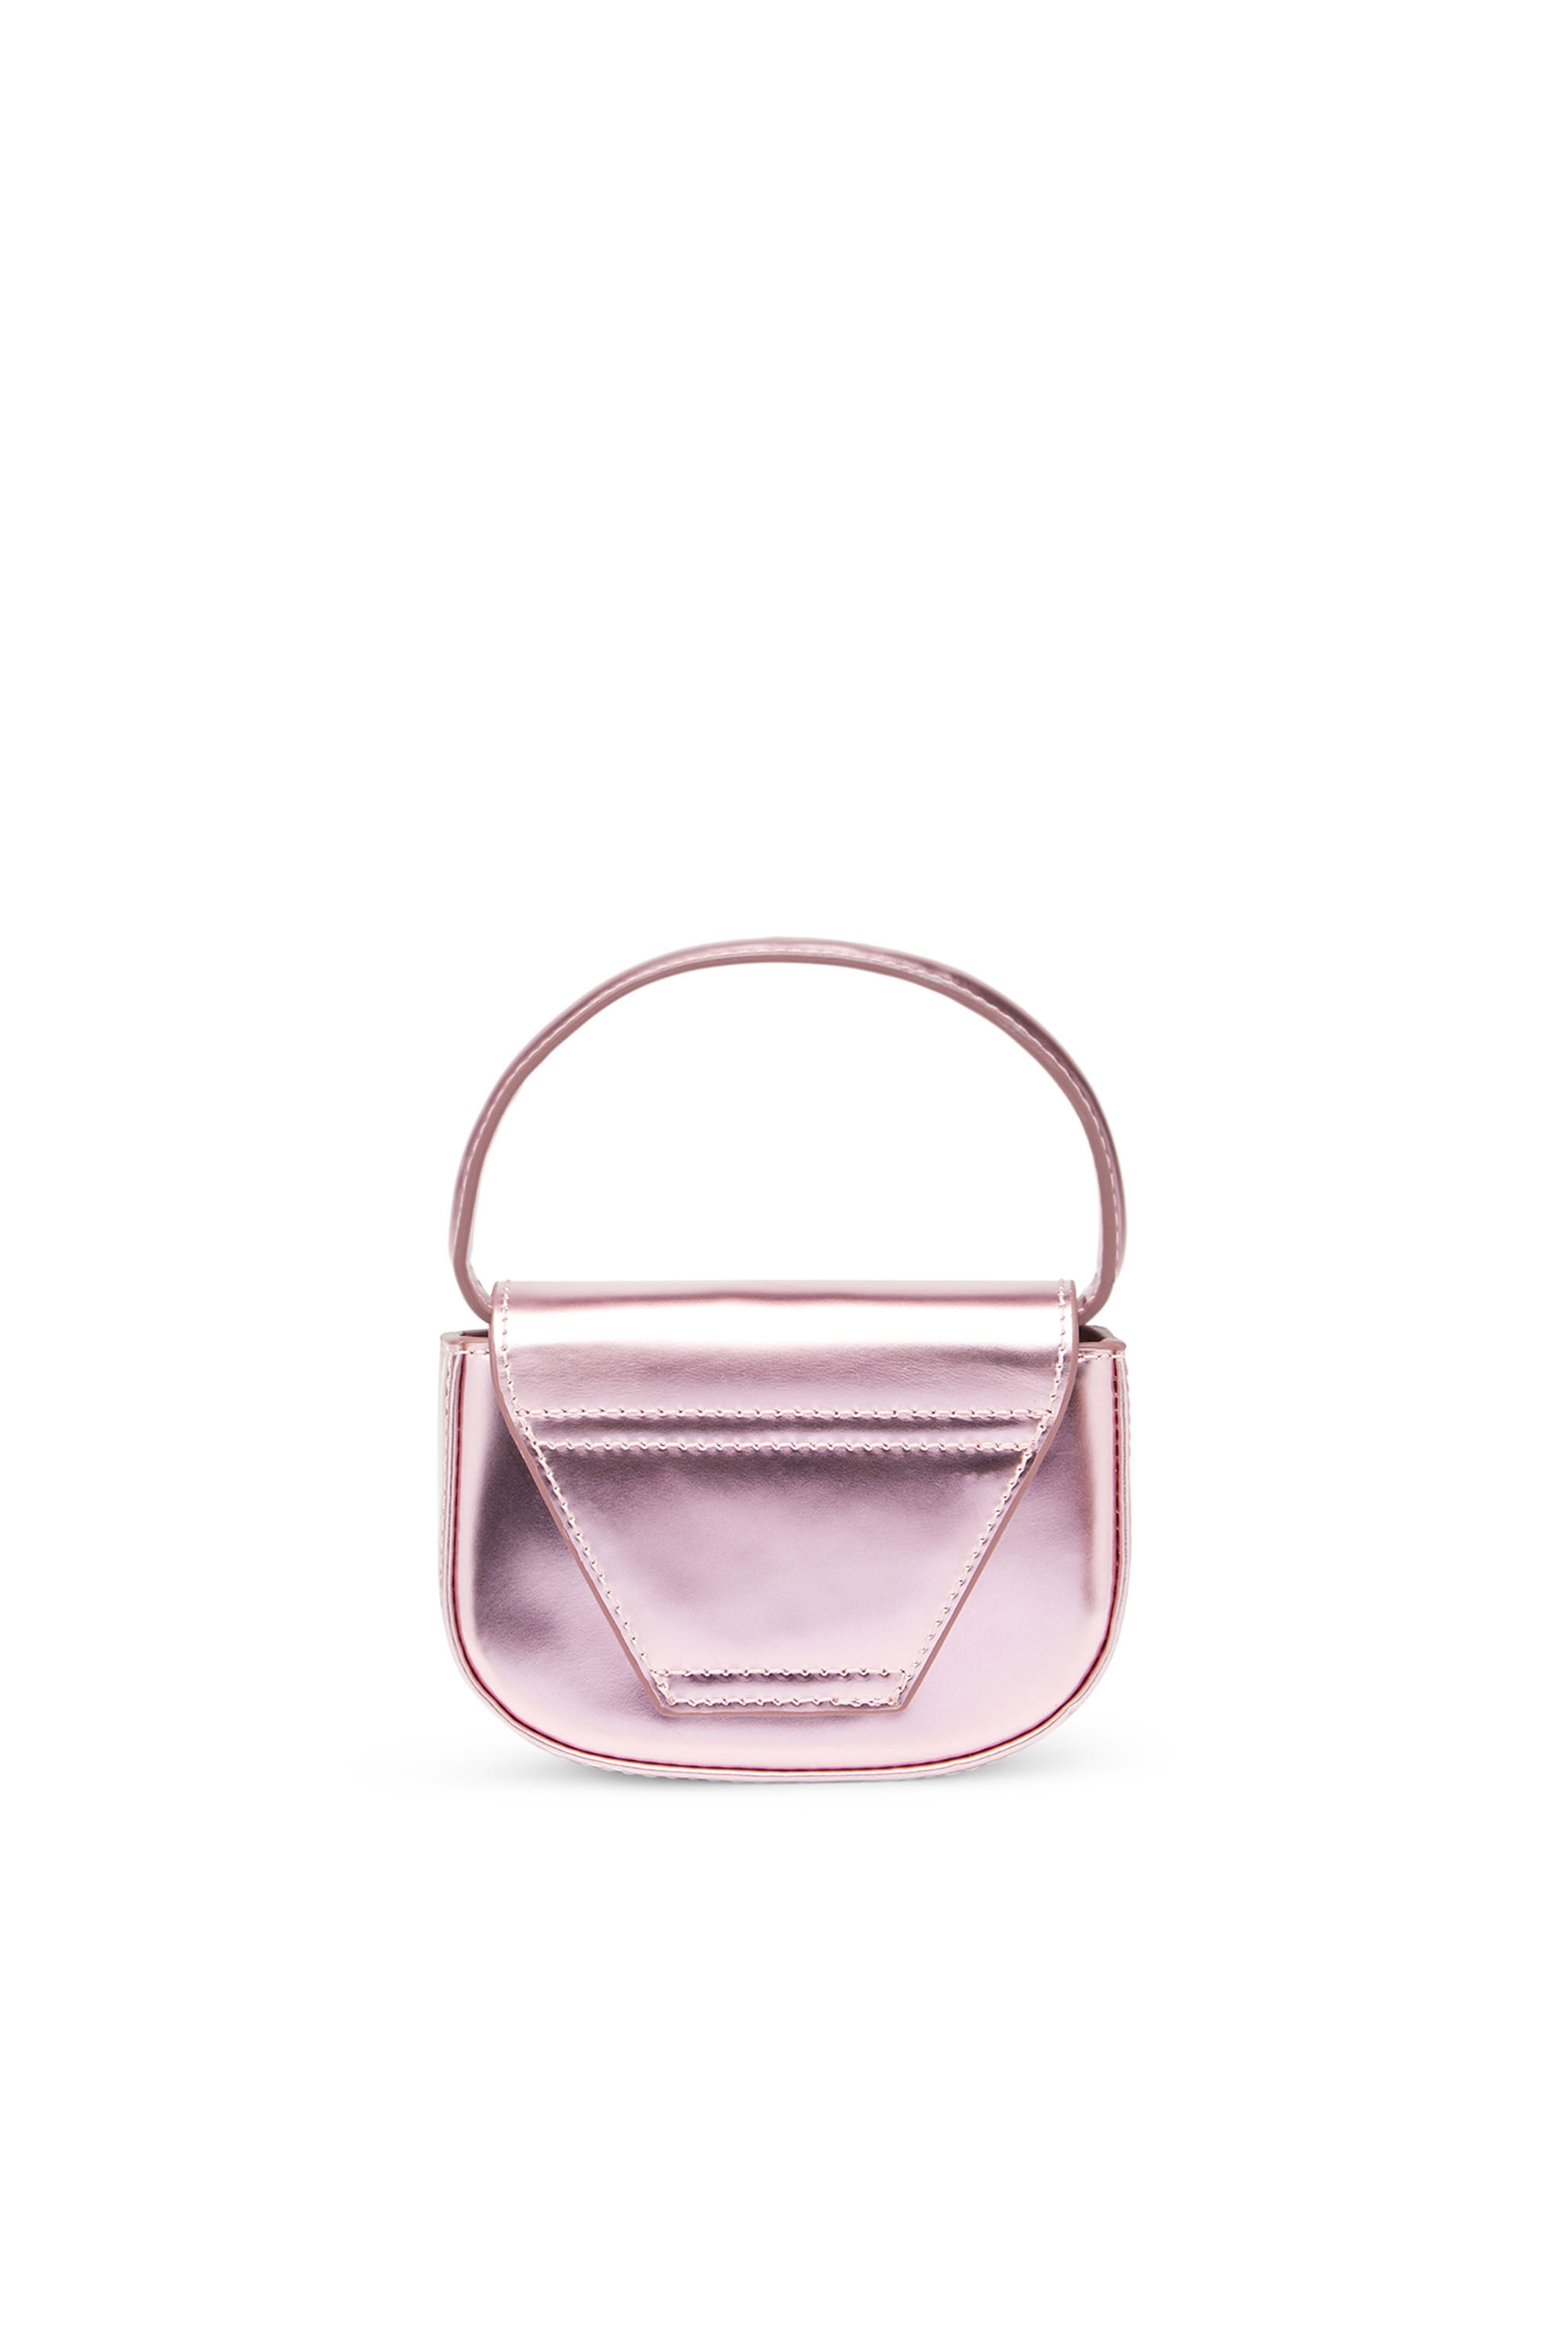 Diesel - 1DR-XS-S, Woman 1DR-XS-S-Iconic mini bag in mirrored leather in Pink - Image 3